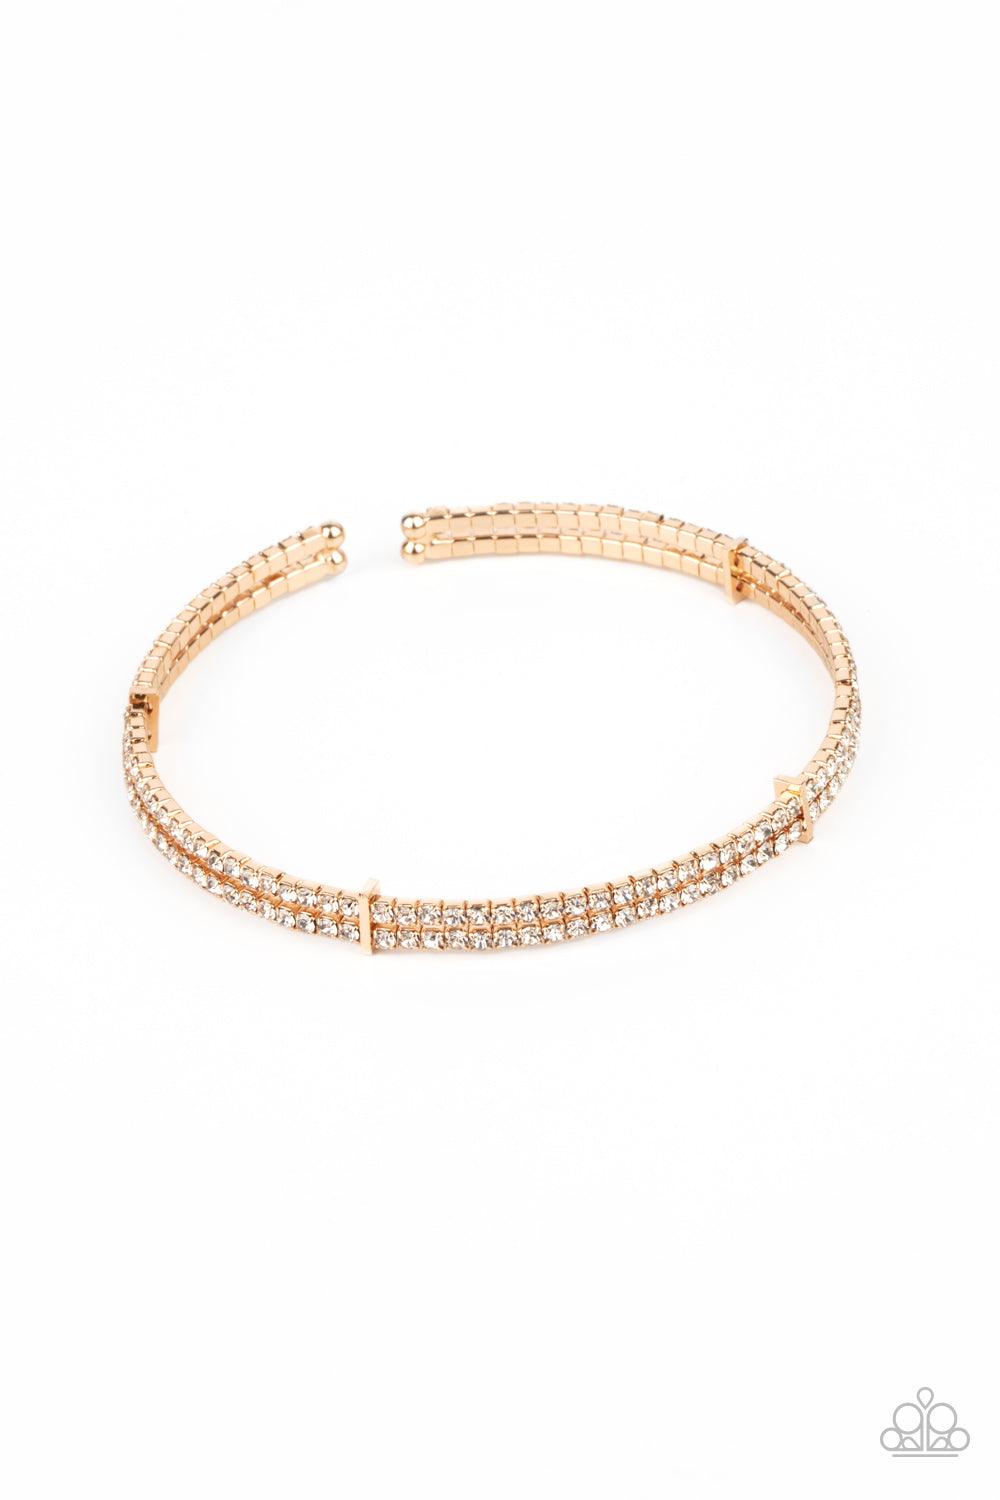 Paparazzi Accessories Standout Opulence - Gold Held together with dainty gold fittings, two glittery strands of white rhinestones delicately curl around the wrist for a timeless finish. Sold as one individual bracelet. Jewelry